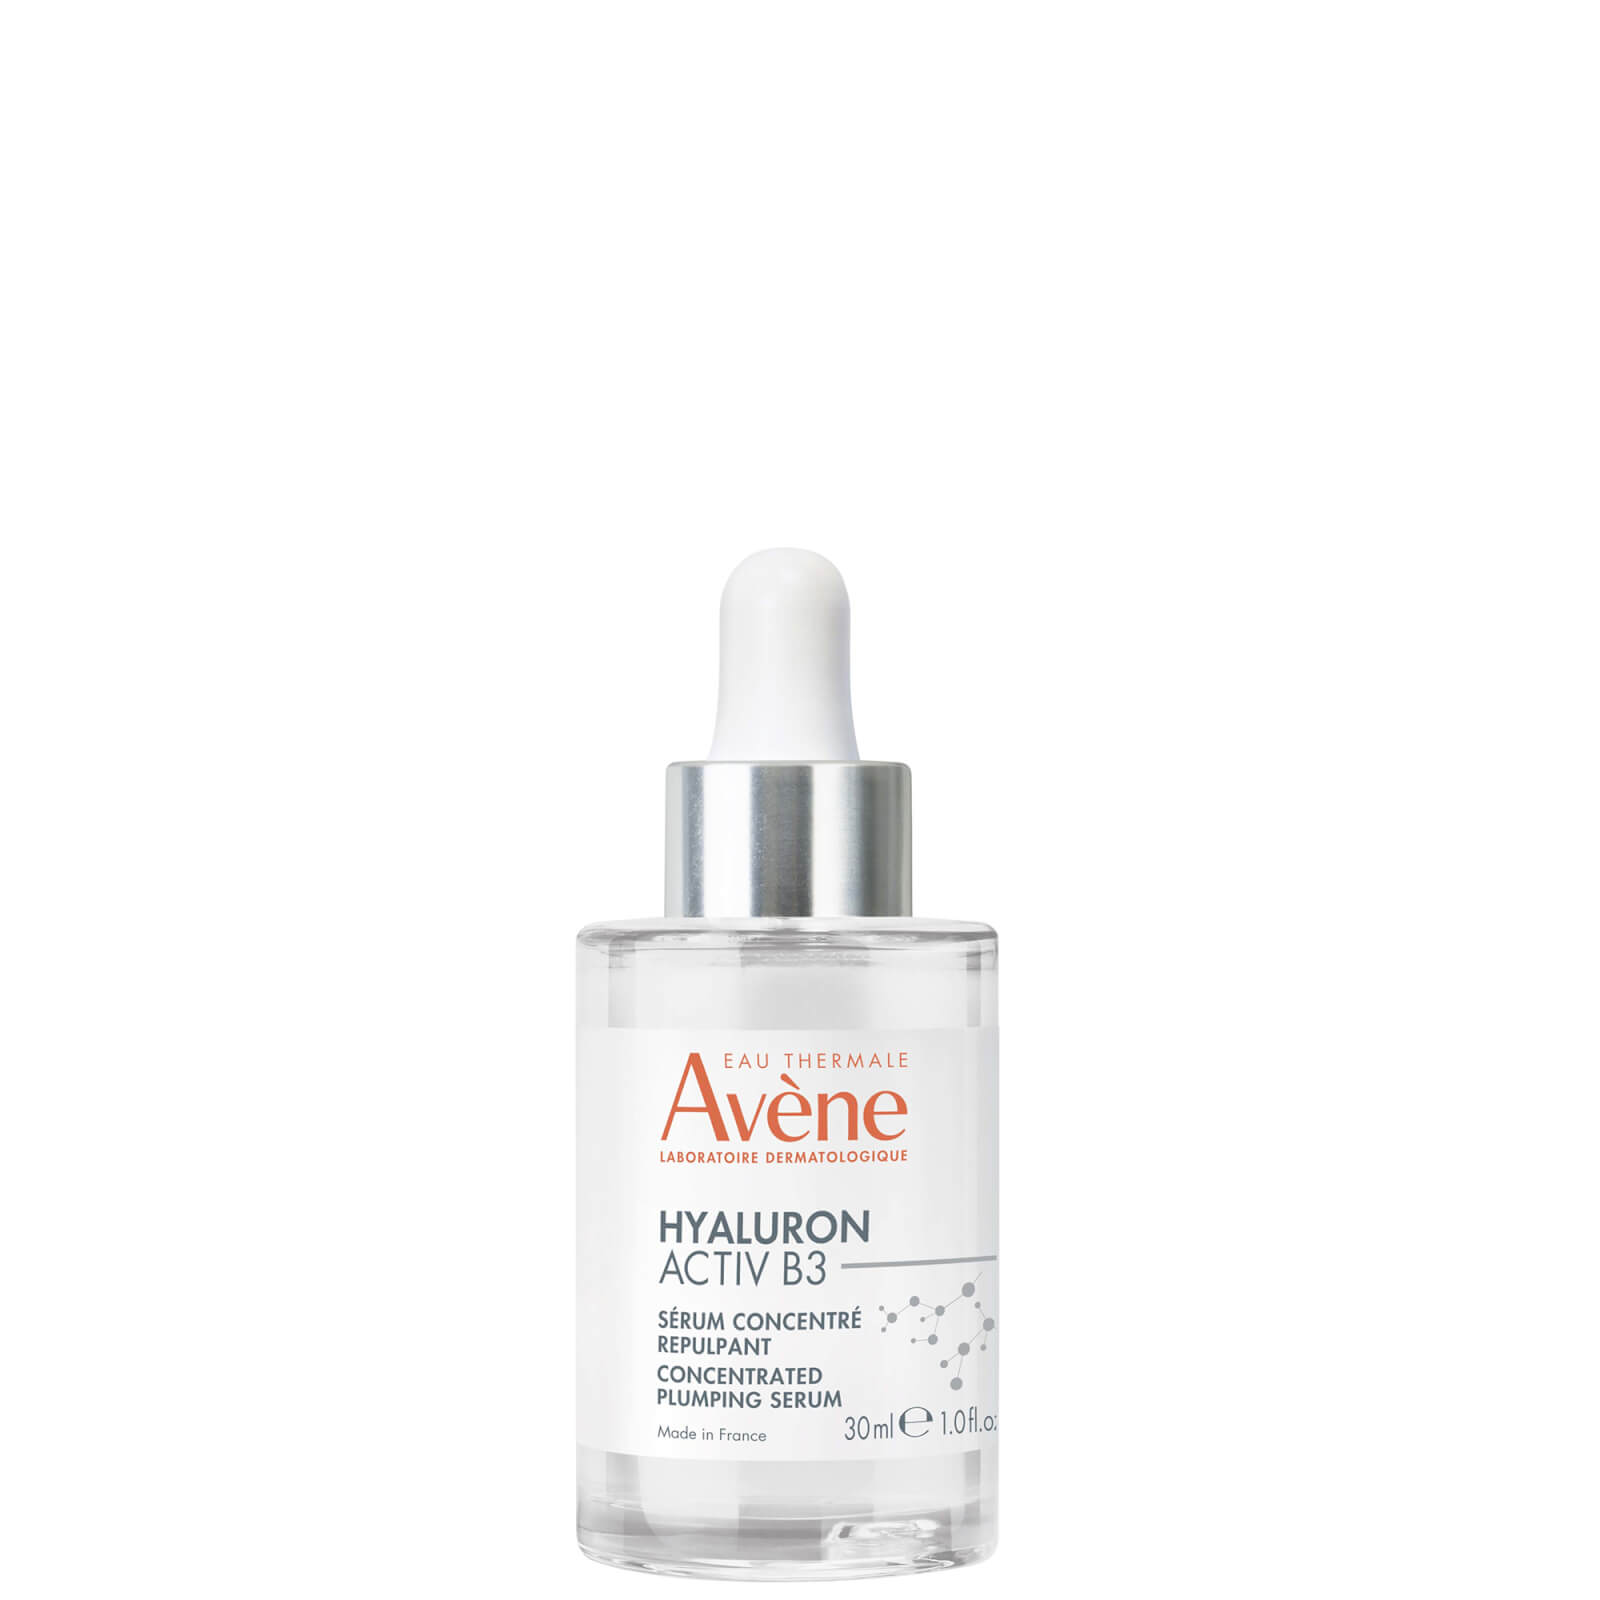 Avene Hyaluron Activ B3 Concentrated Plumping Serum 30ml In White